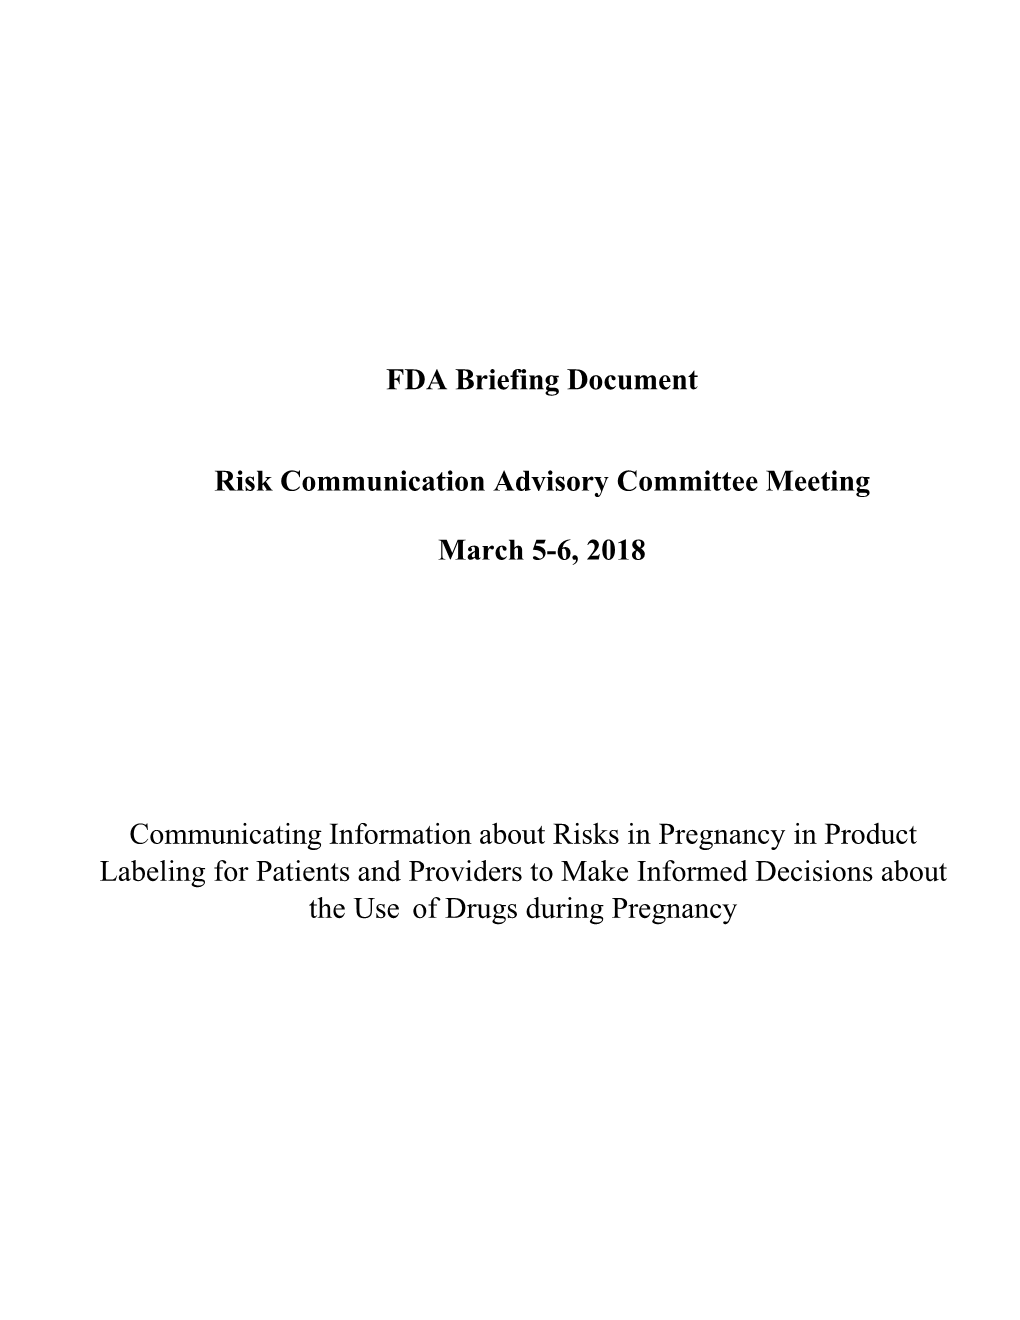 Briefing Document for March 2018 FDA RCAC